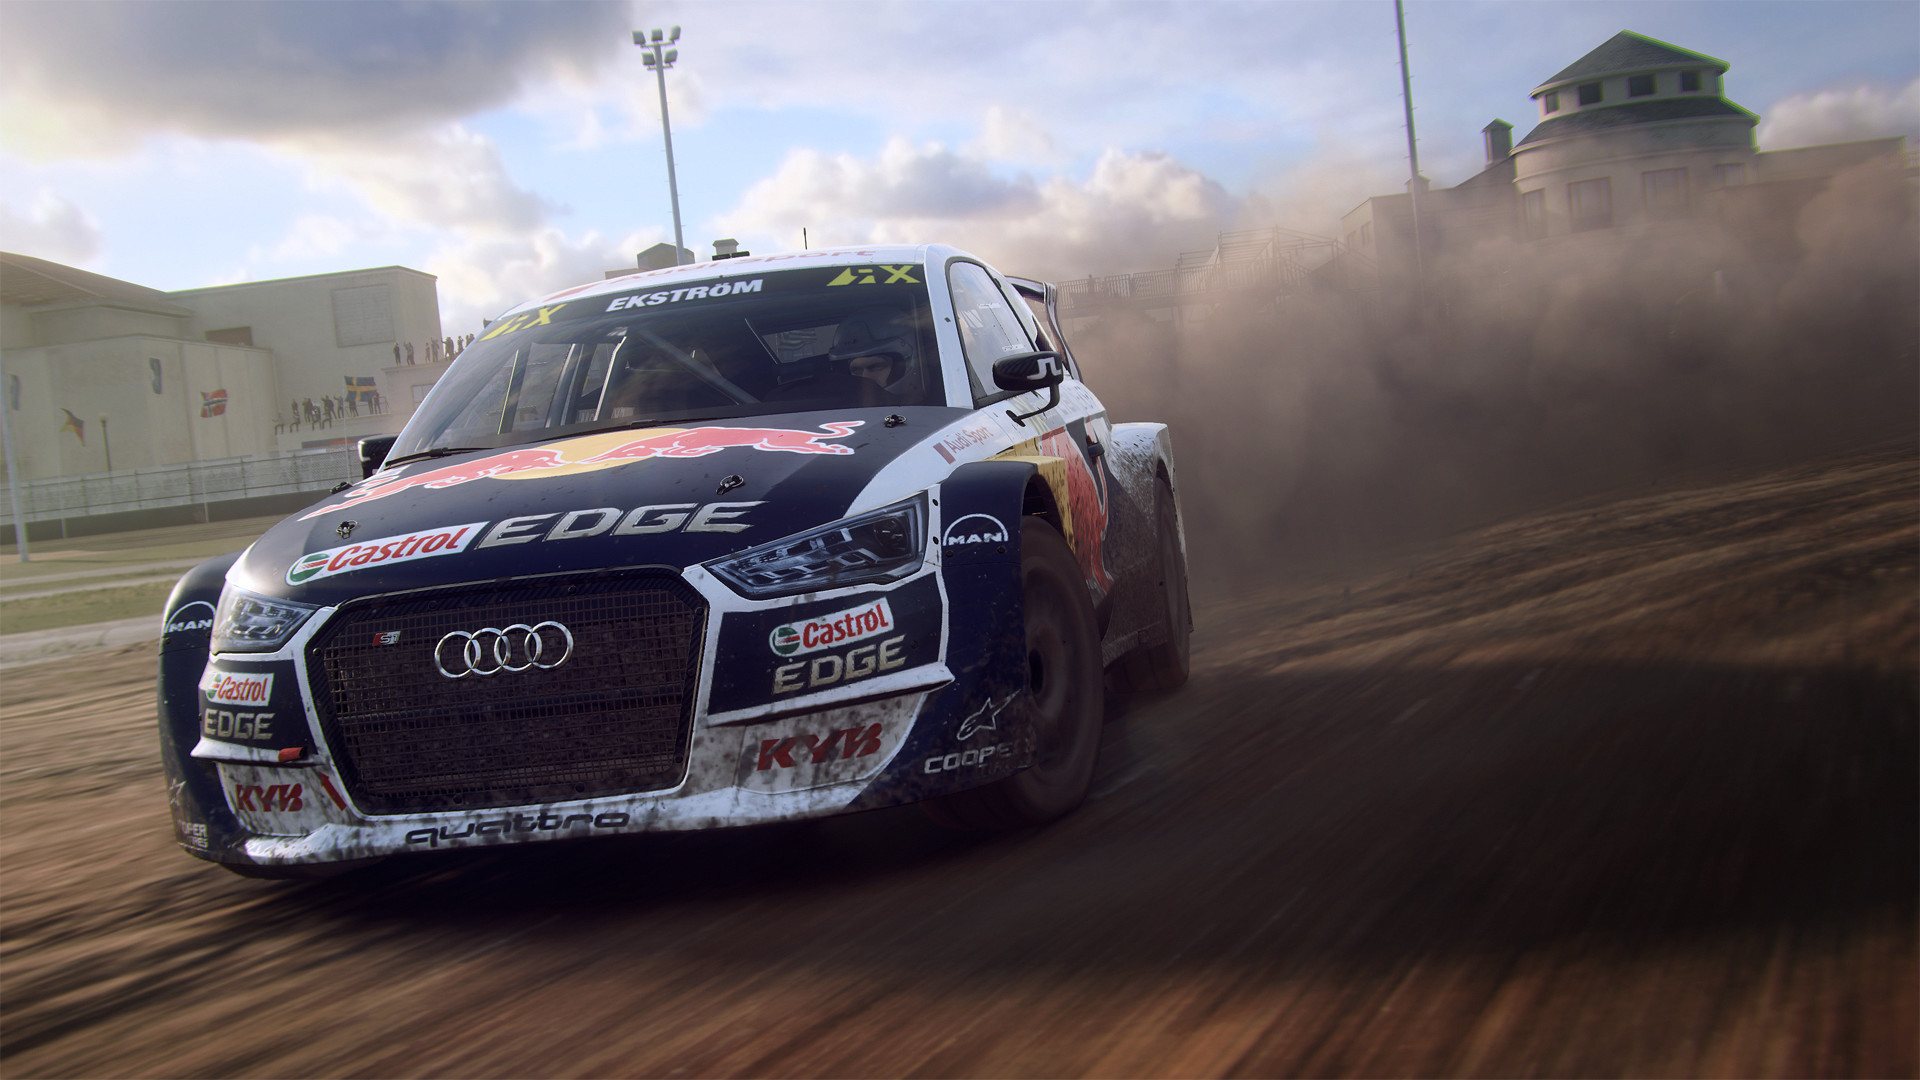 DiRT Rally 2.0 Day One Edition Steam CD Key